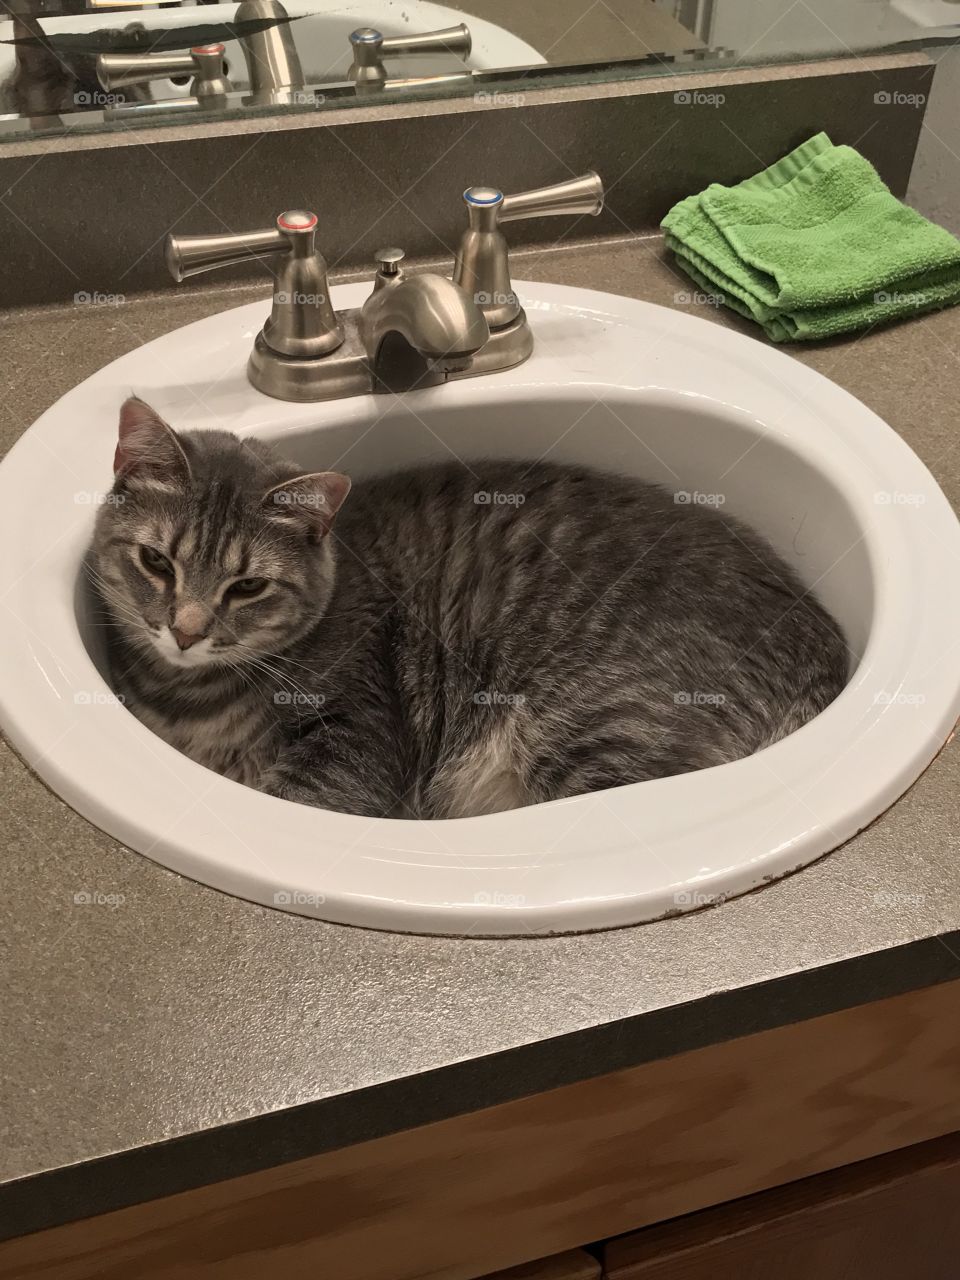 My cat Edie in the bathroom sink...I don’t know what it is with cats and sinks but it’s adorable. 